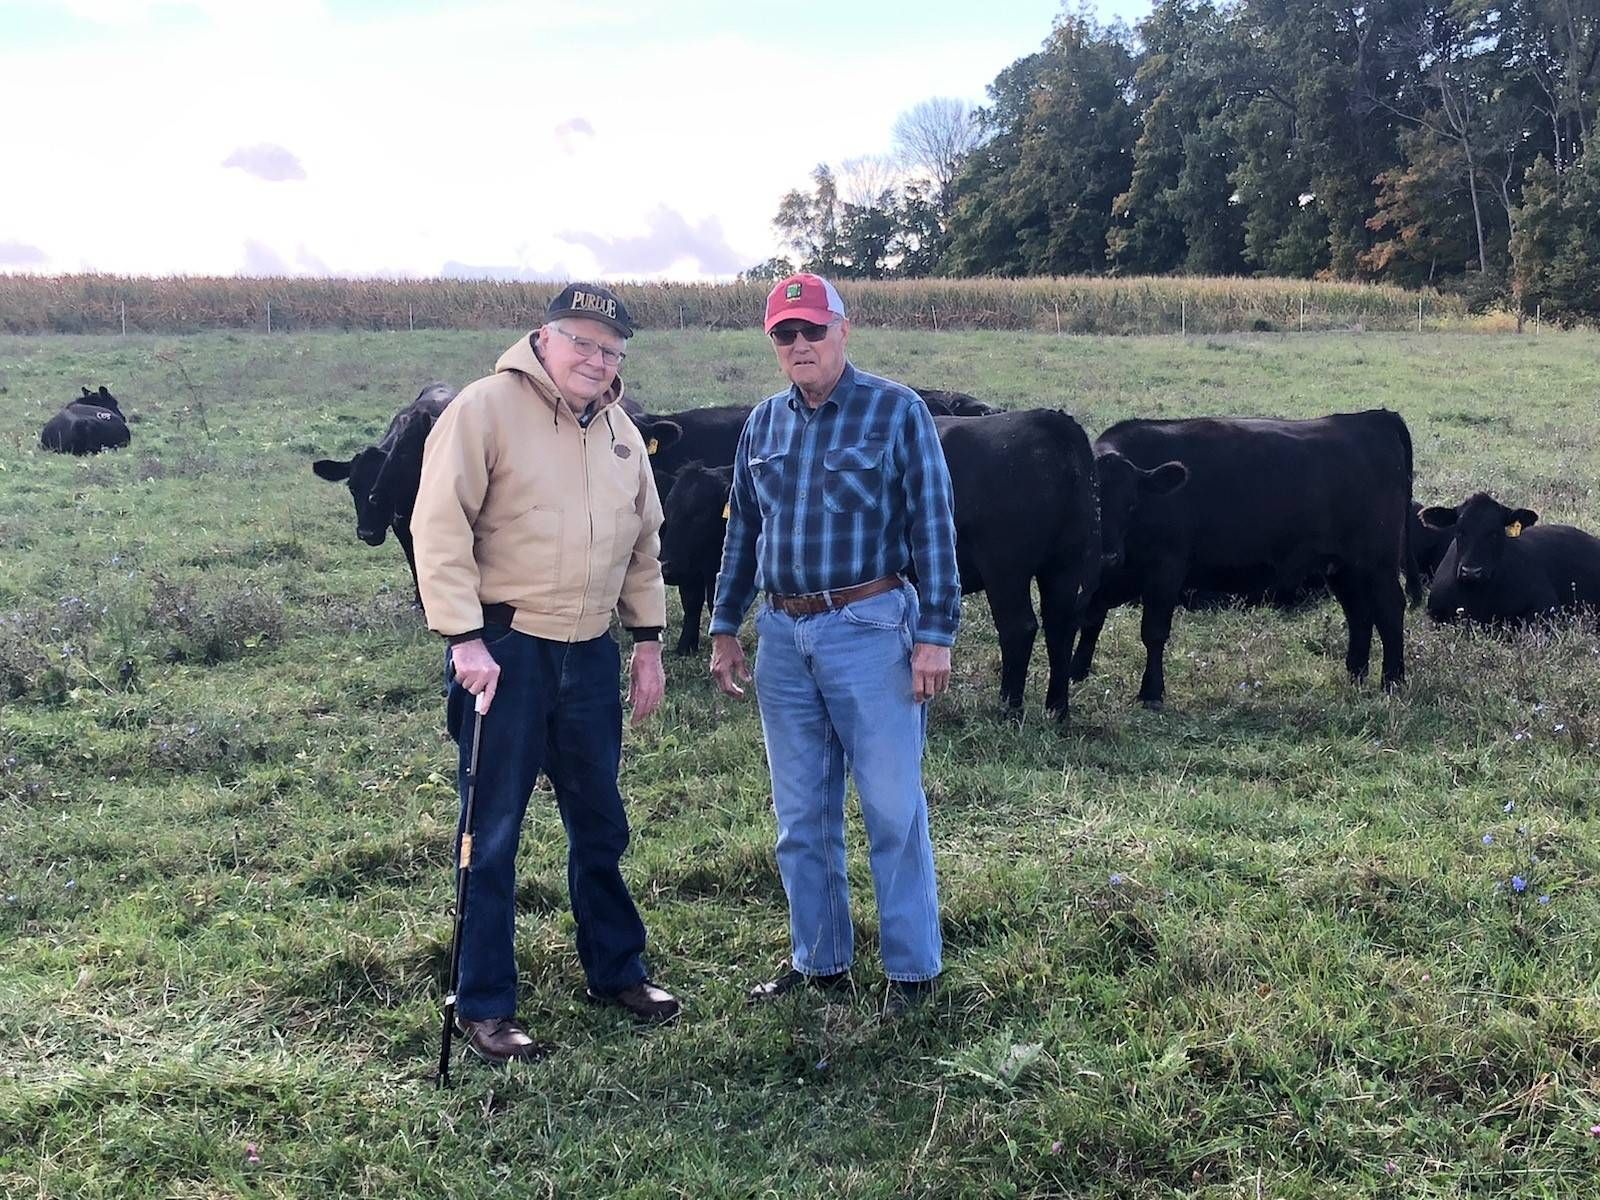 William McVay visits his friend Charley Robinson at his farm in Mulberry, Indiana